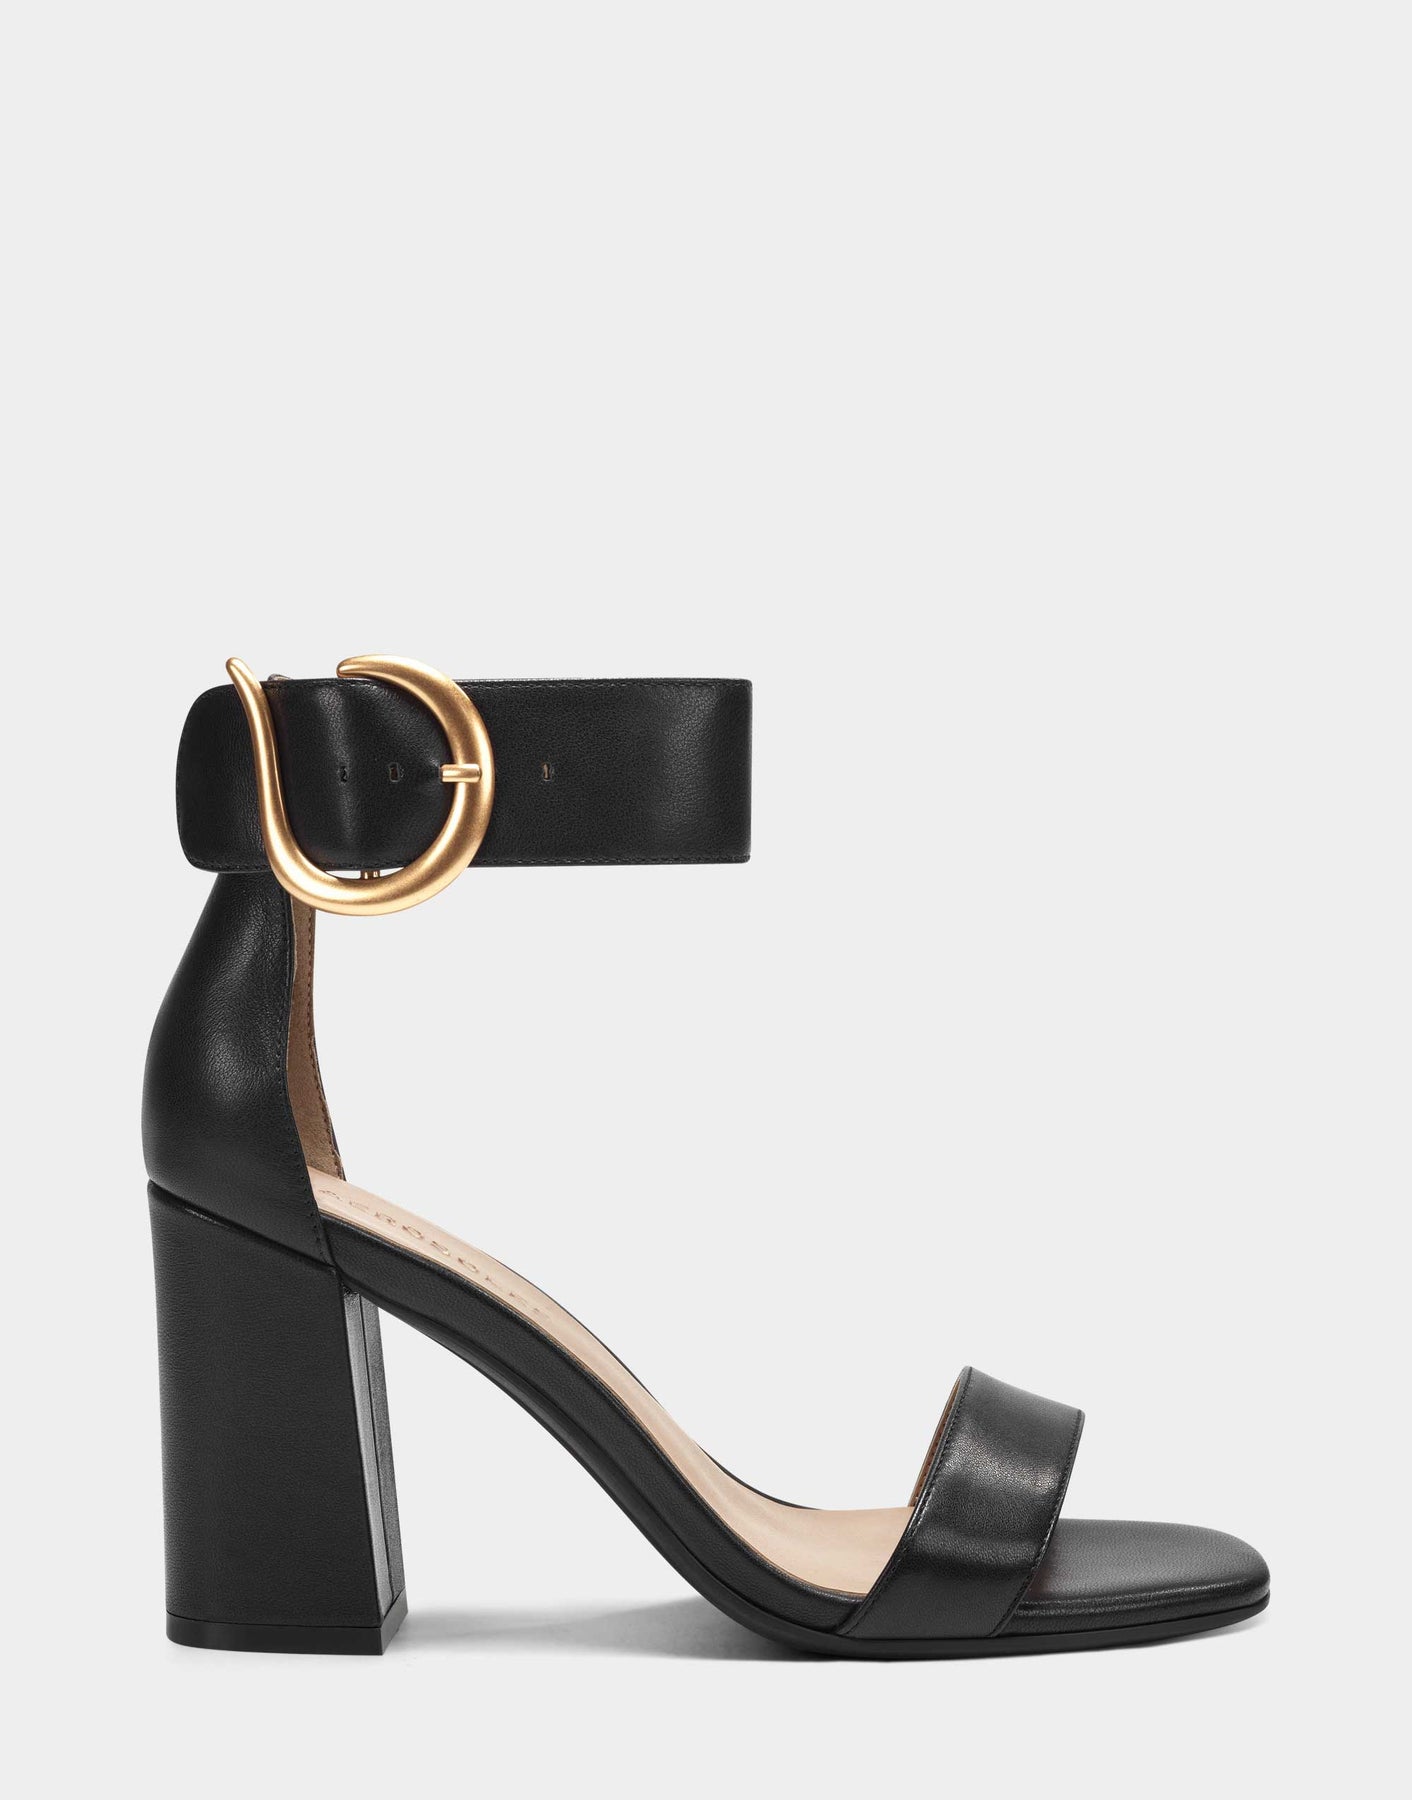 Black Leather Two Strap Heel with Ankle Strap and Gold Buckle Landon ...